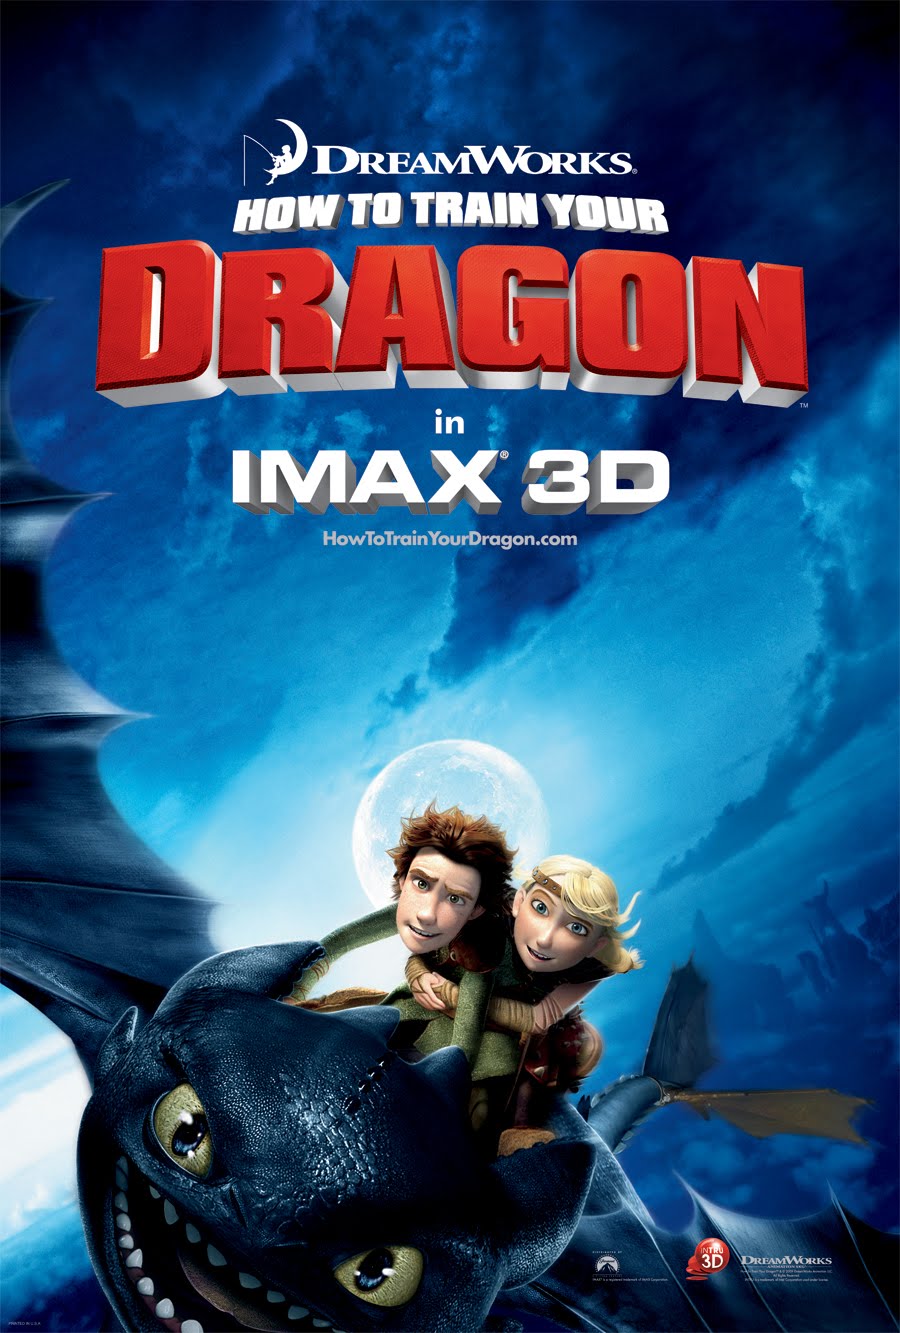 [How+to+train+your+dragon+imax+poster.jpg]